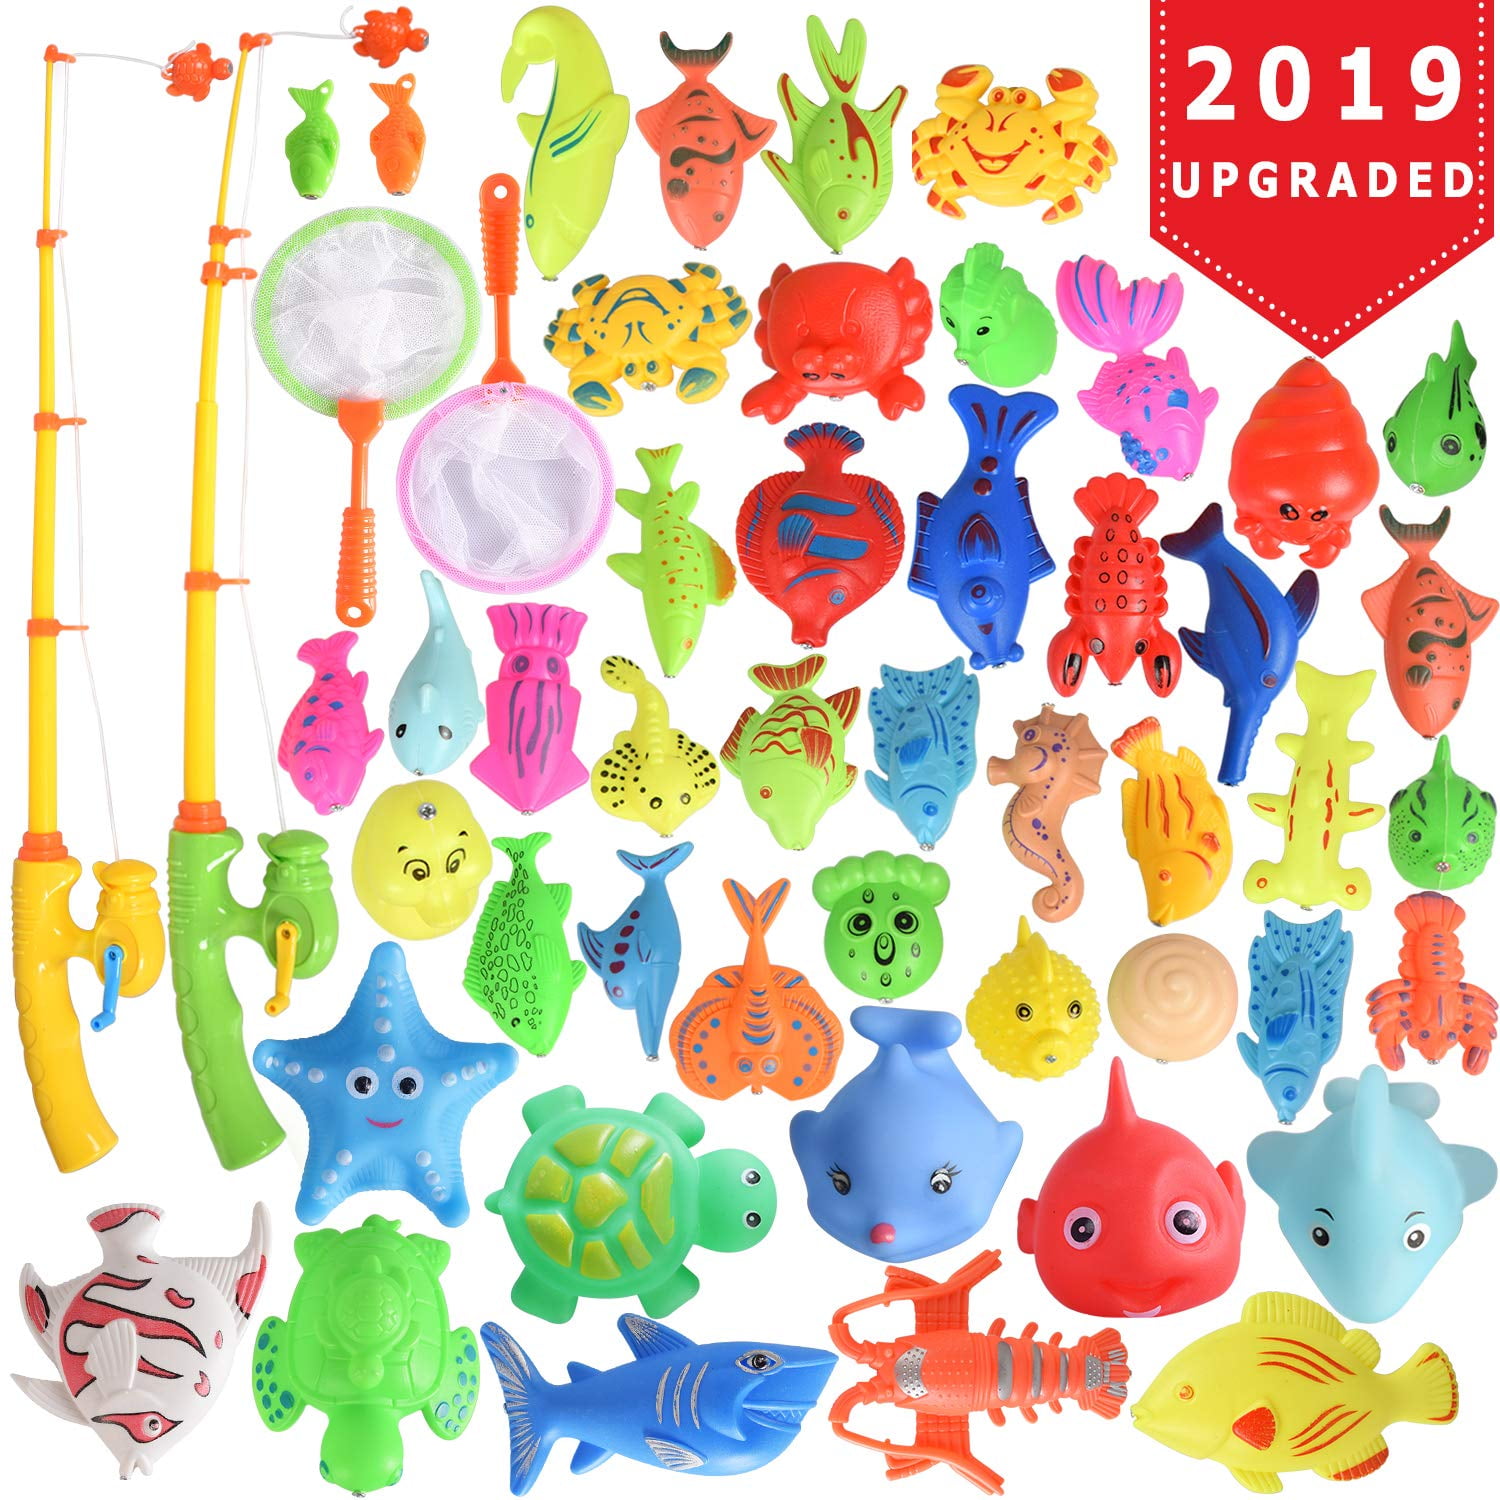 Kids Fishing Pool Game Set of 2 Fishing Poles & Net 8 Rubber Sea Animals Mold Free Water Toys with Mesh Organizer Bag Liberty Imports Magnetic Toddler Bath Toys 